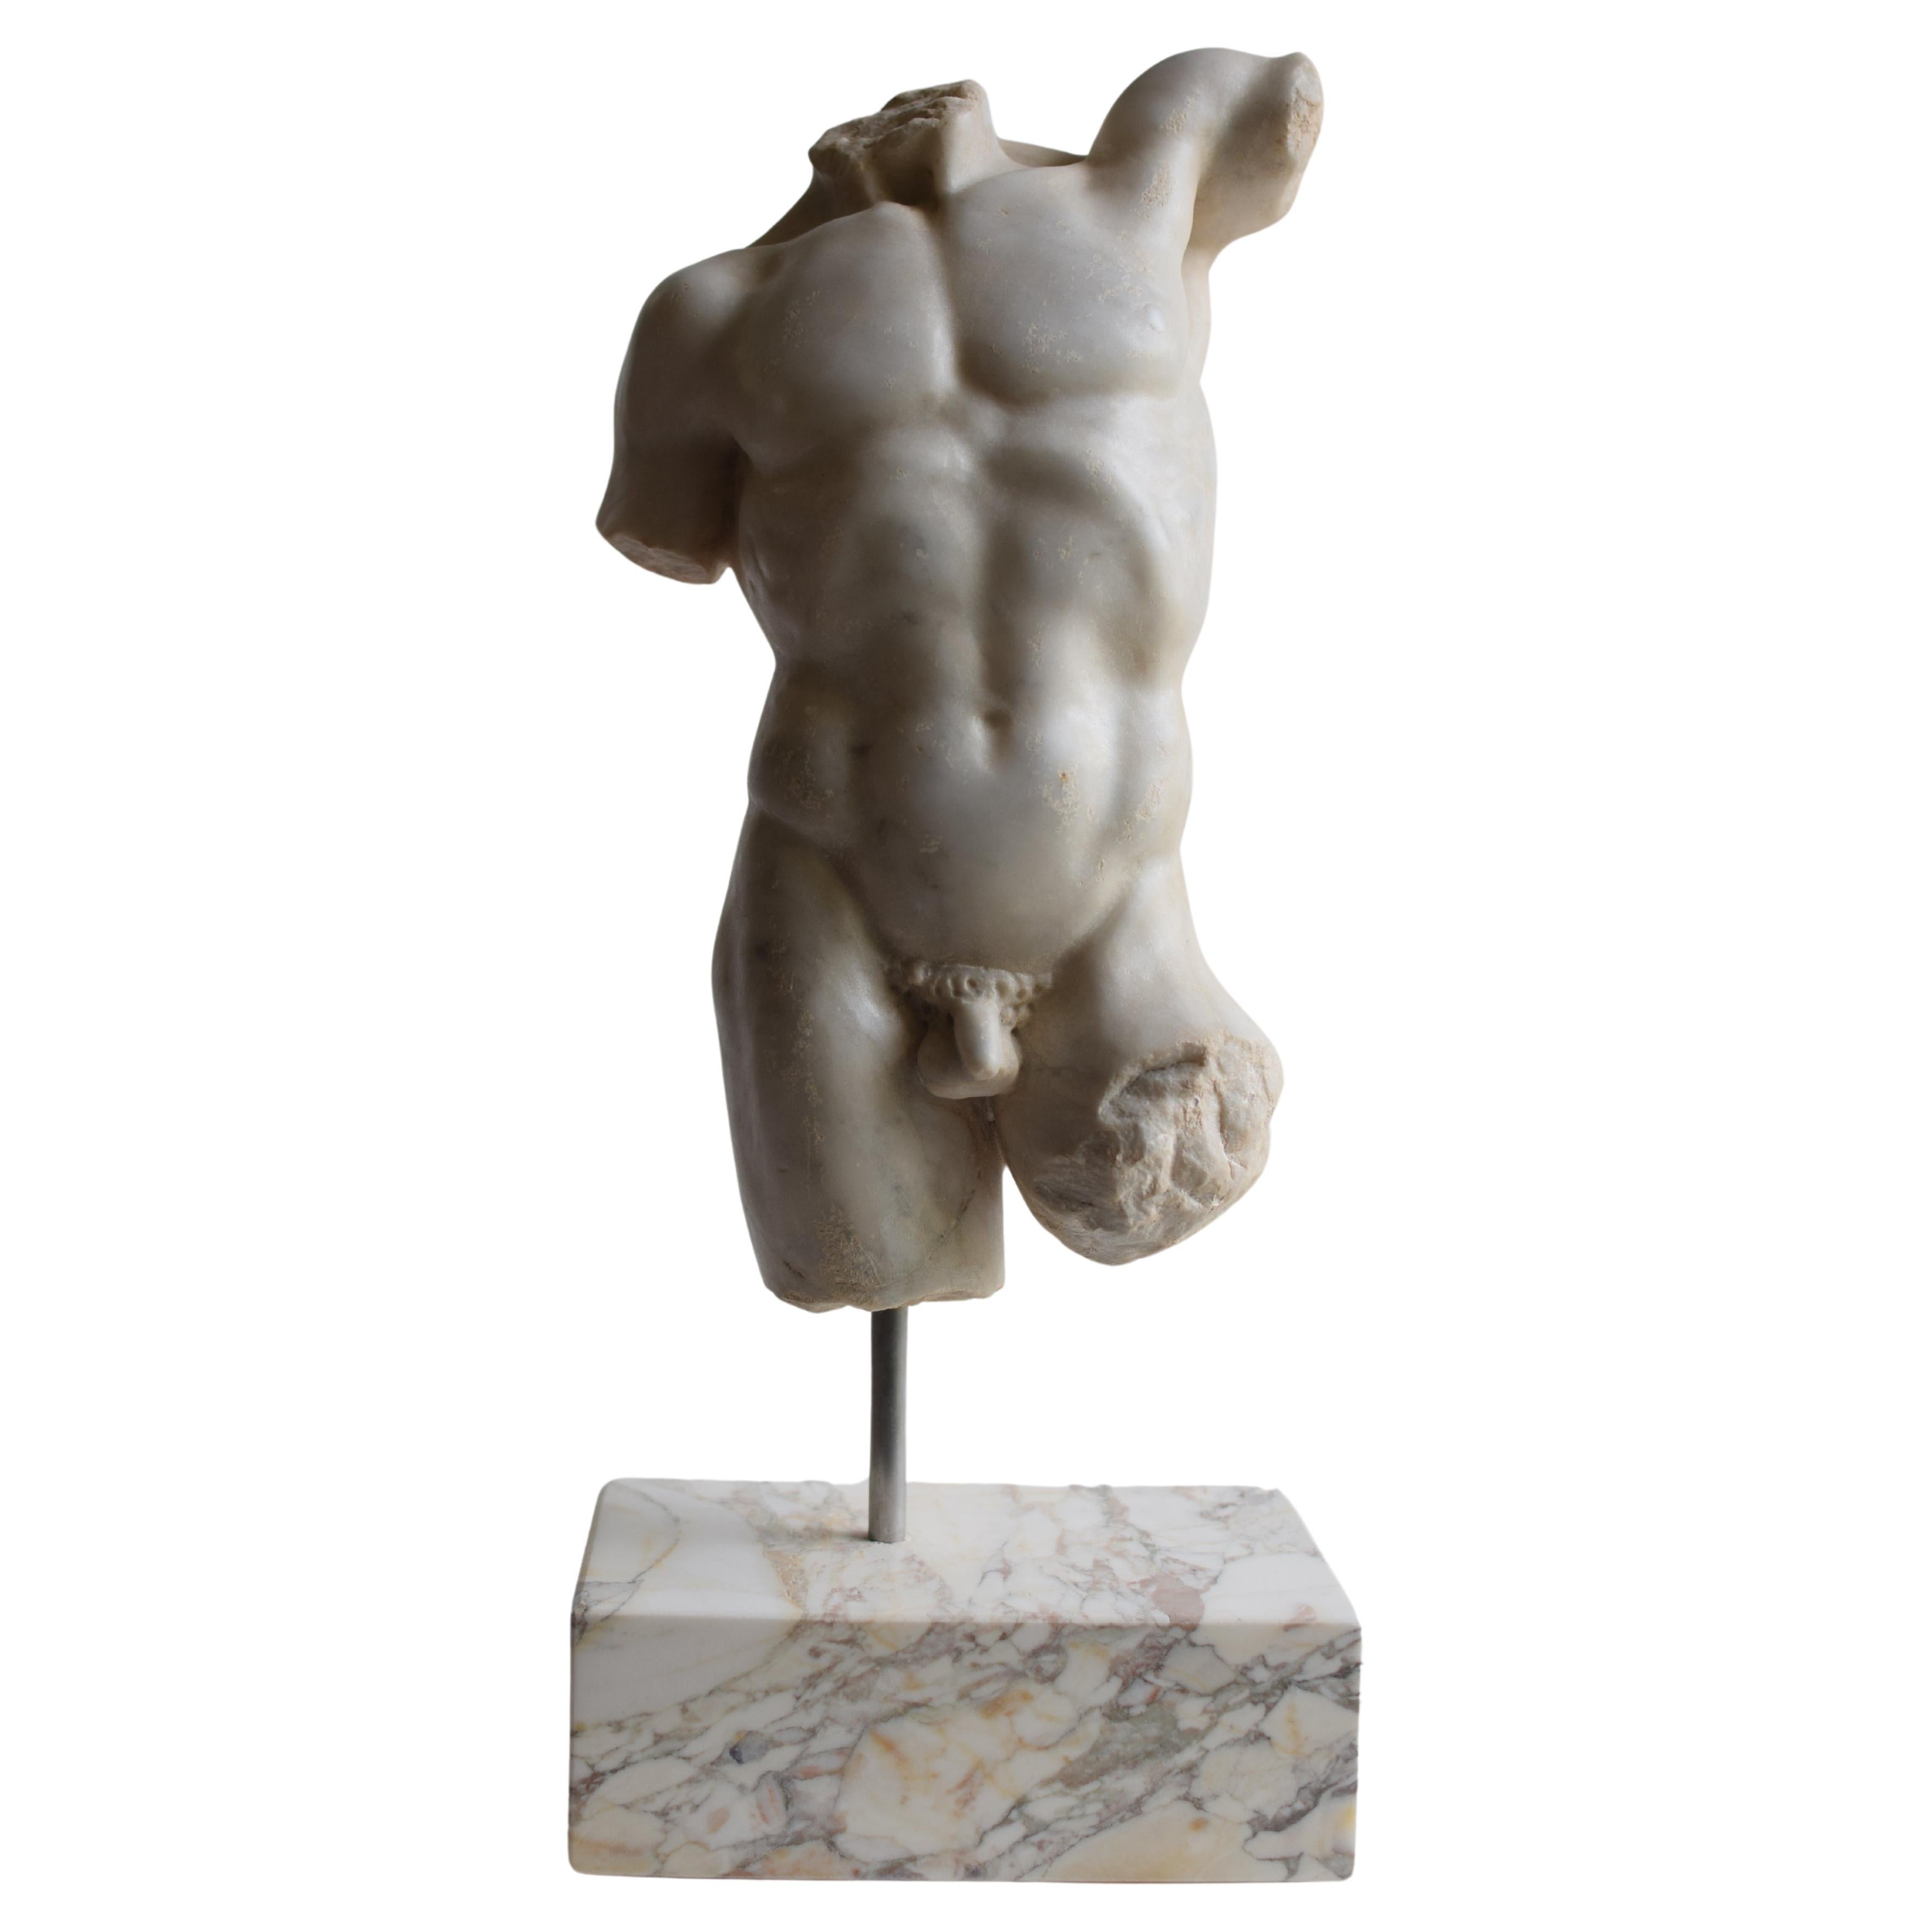 What is a figurative sculpture?